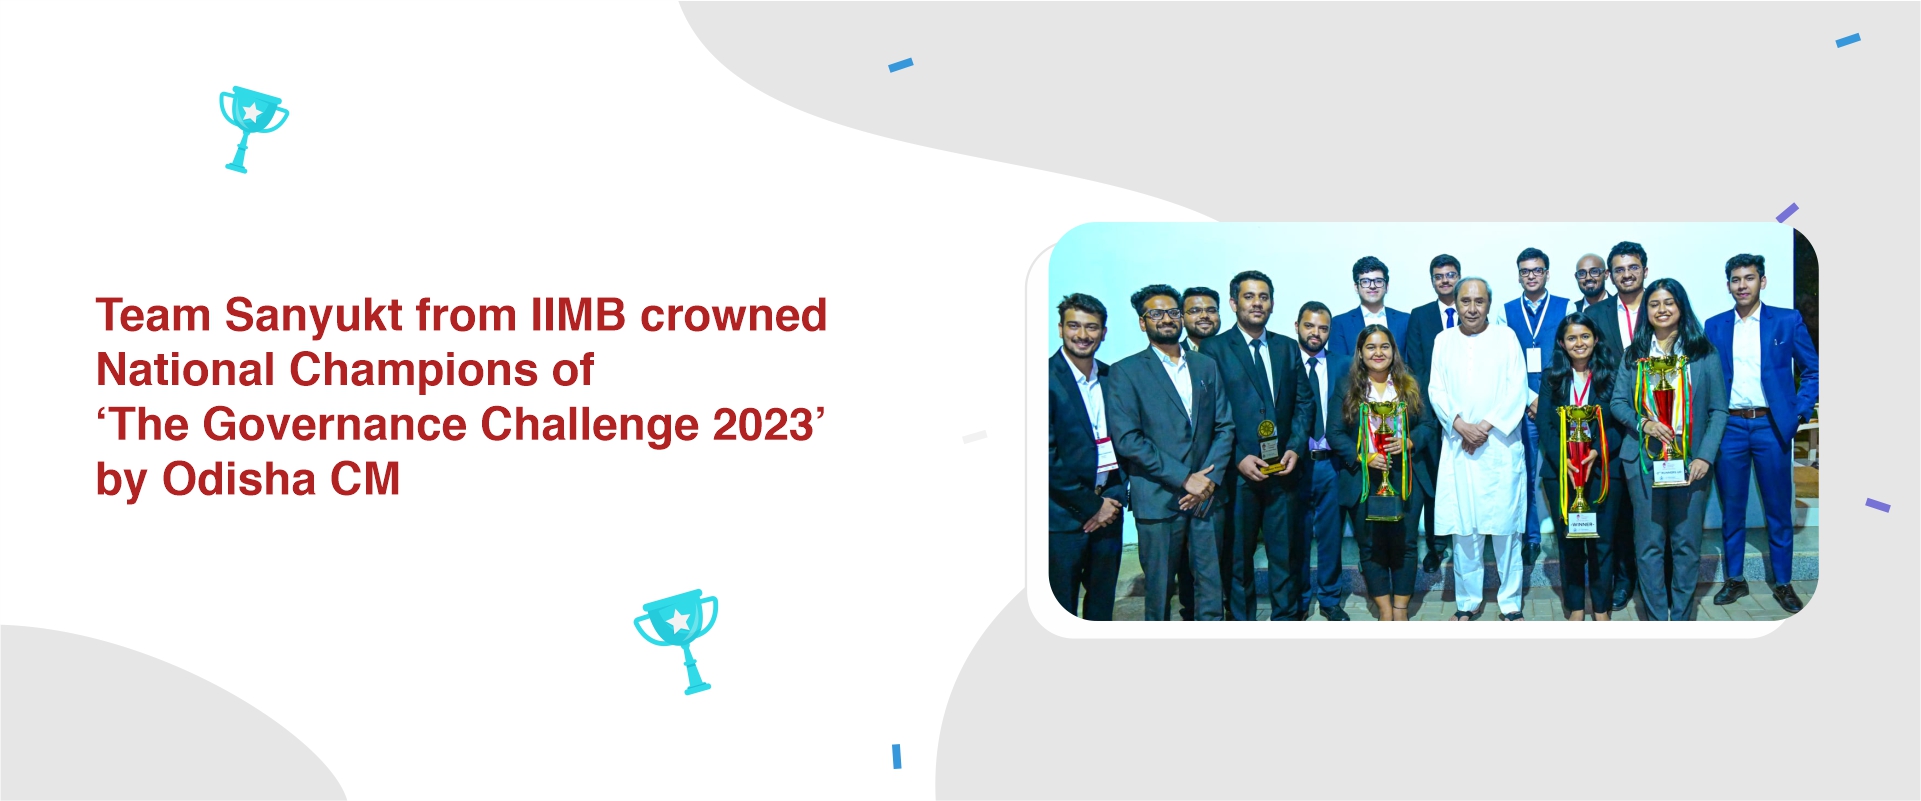 Team Sanyukt from IIMB crowned National Champions of ‘The Governance Challenge 2023’ by Odisha CM 